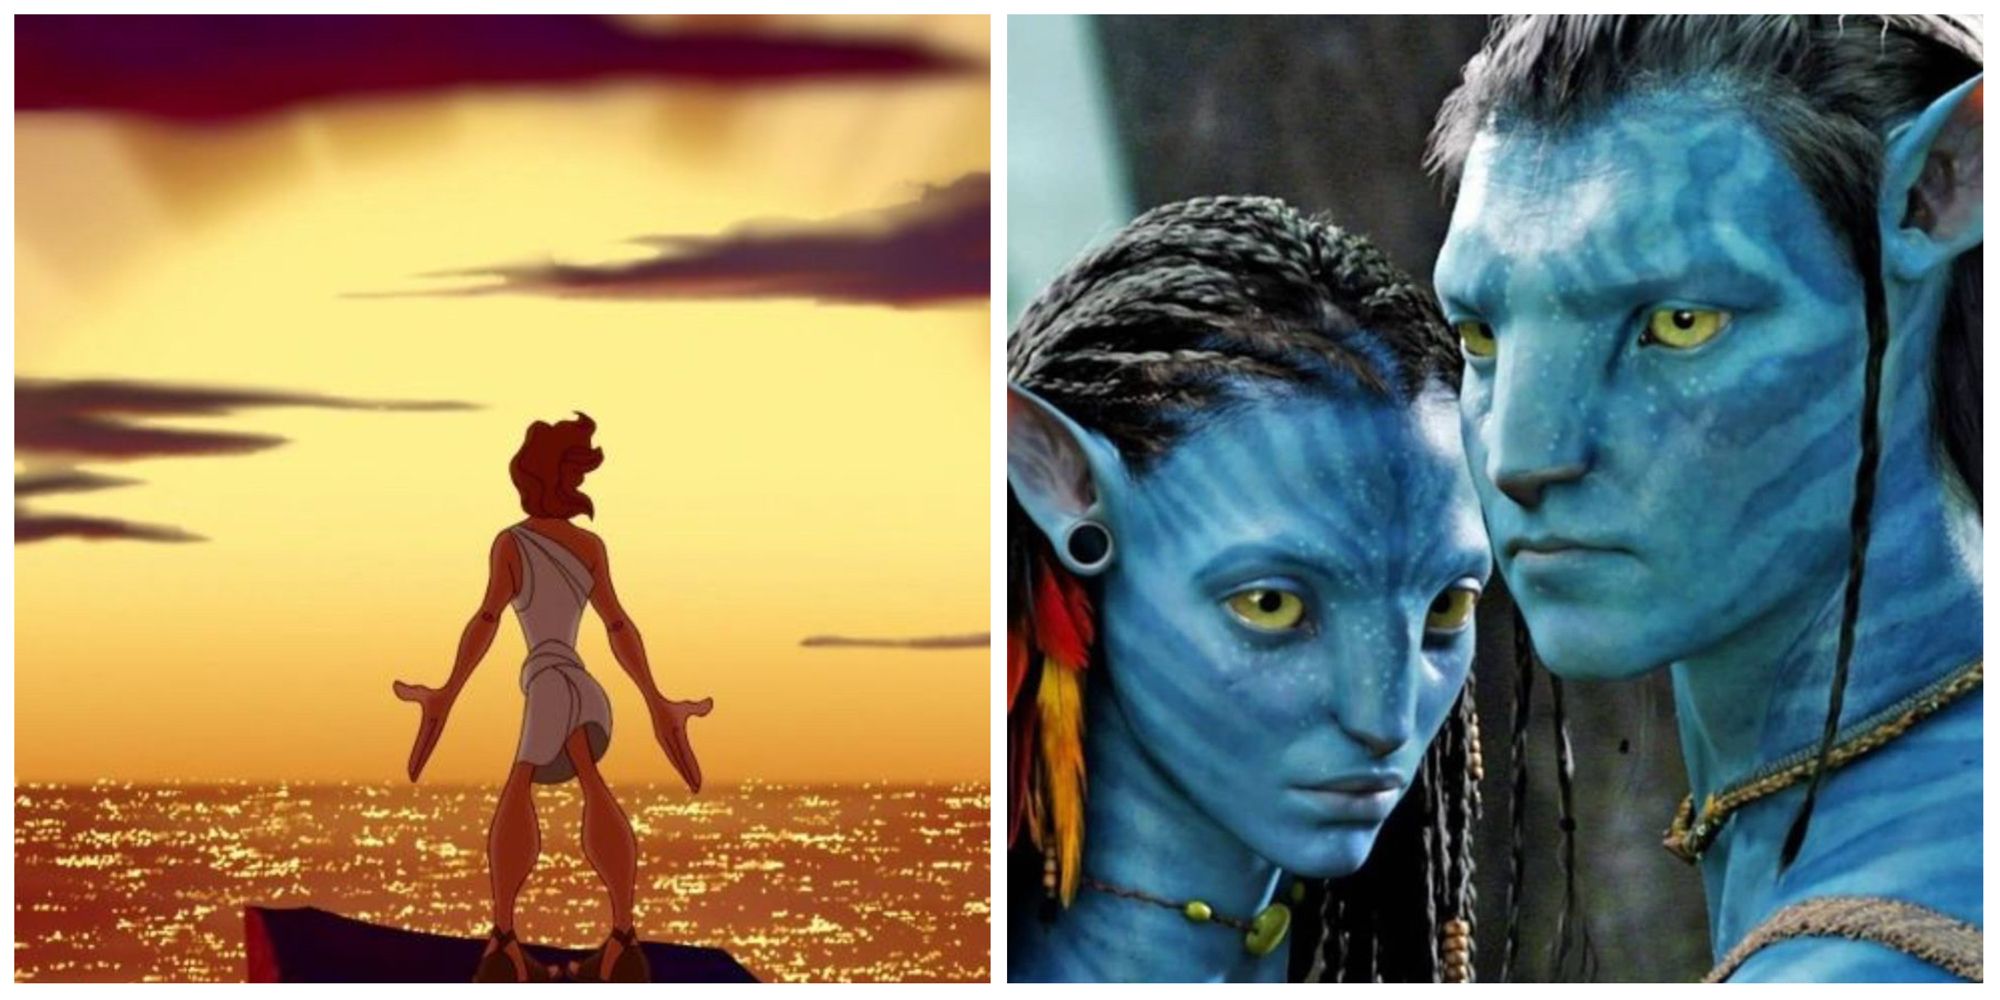 A split image of Hercules from the Disney film and of the main characters from Avatar